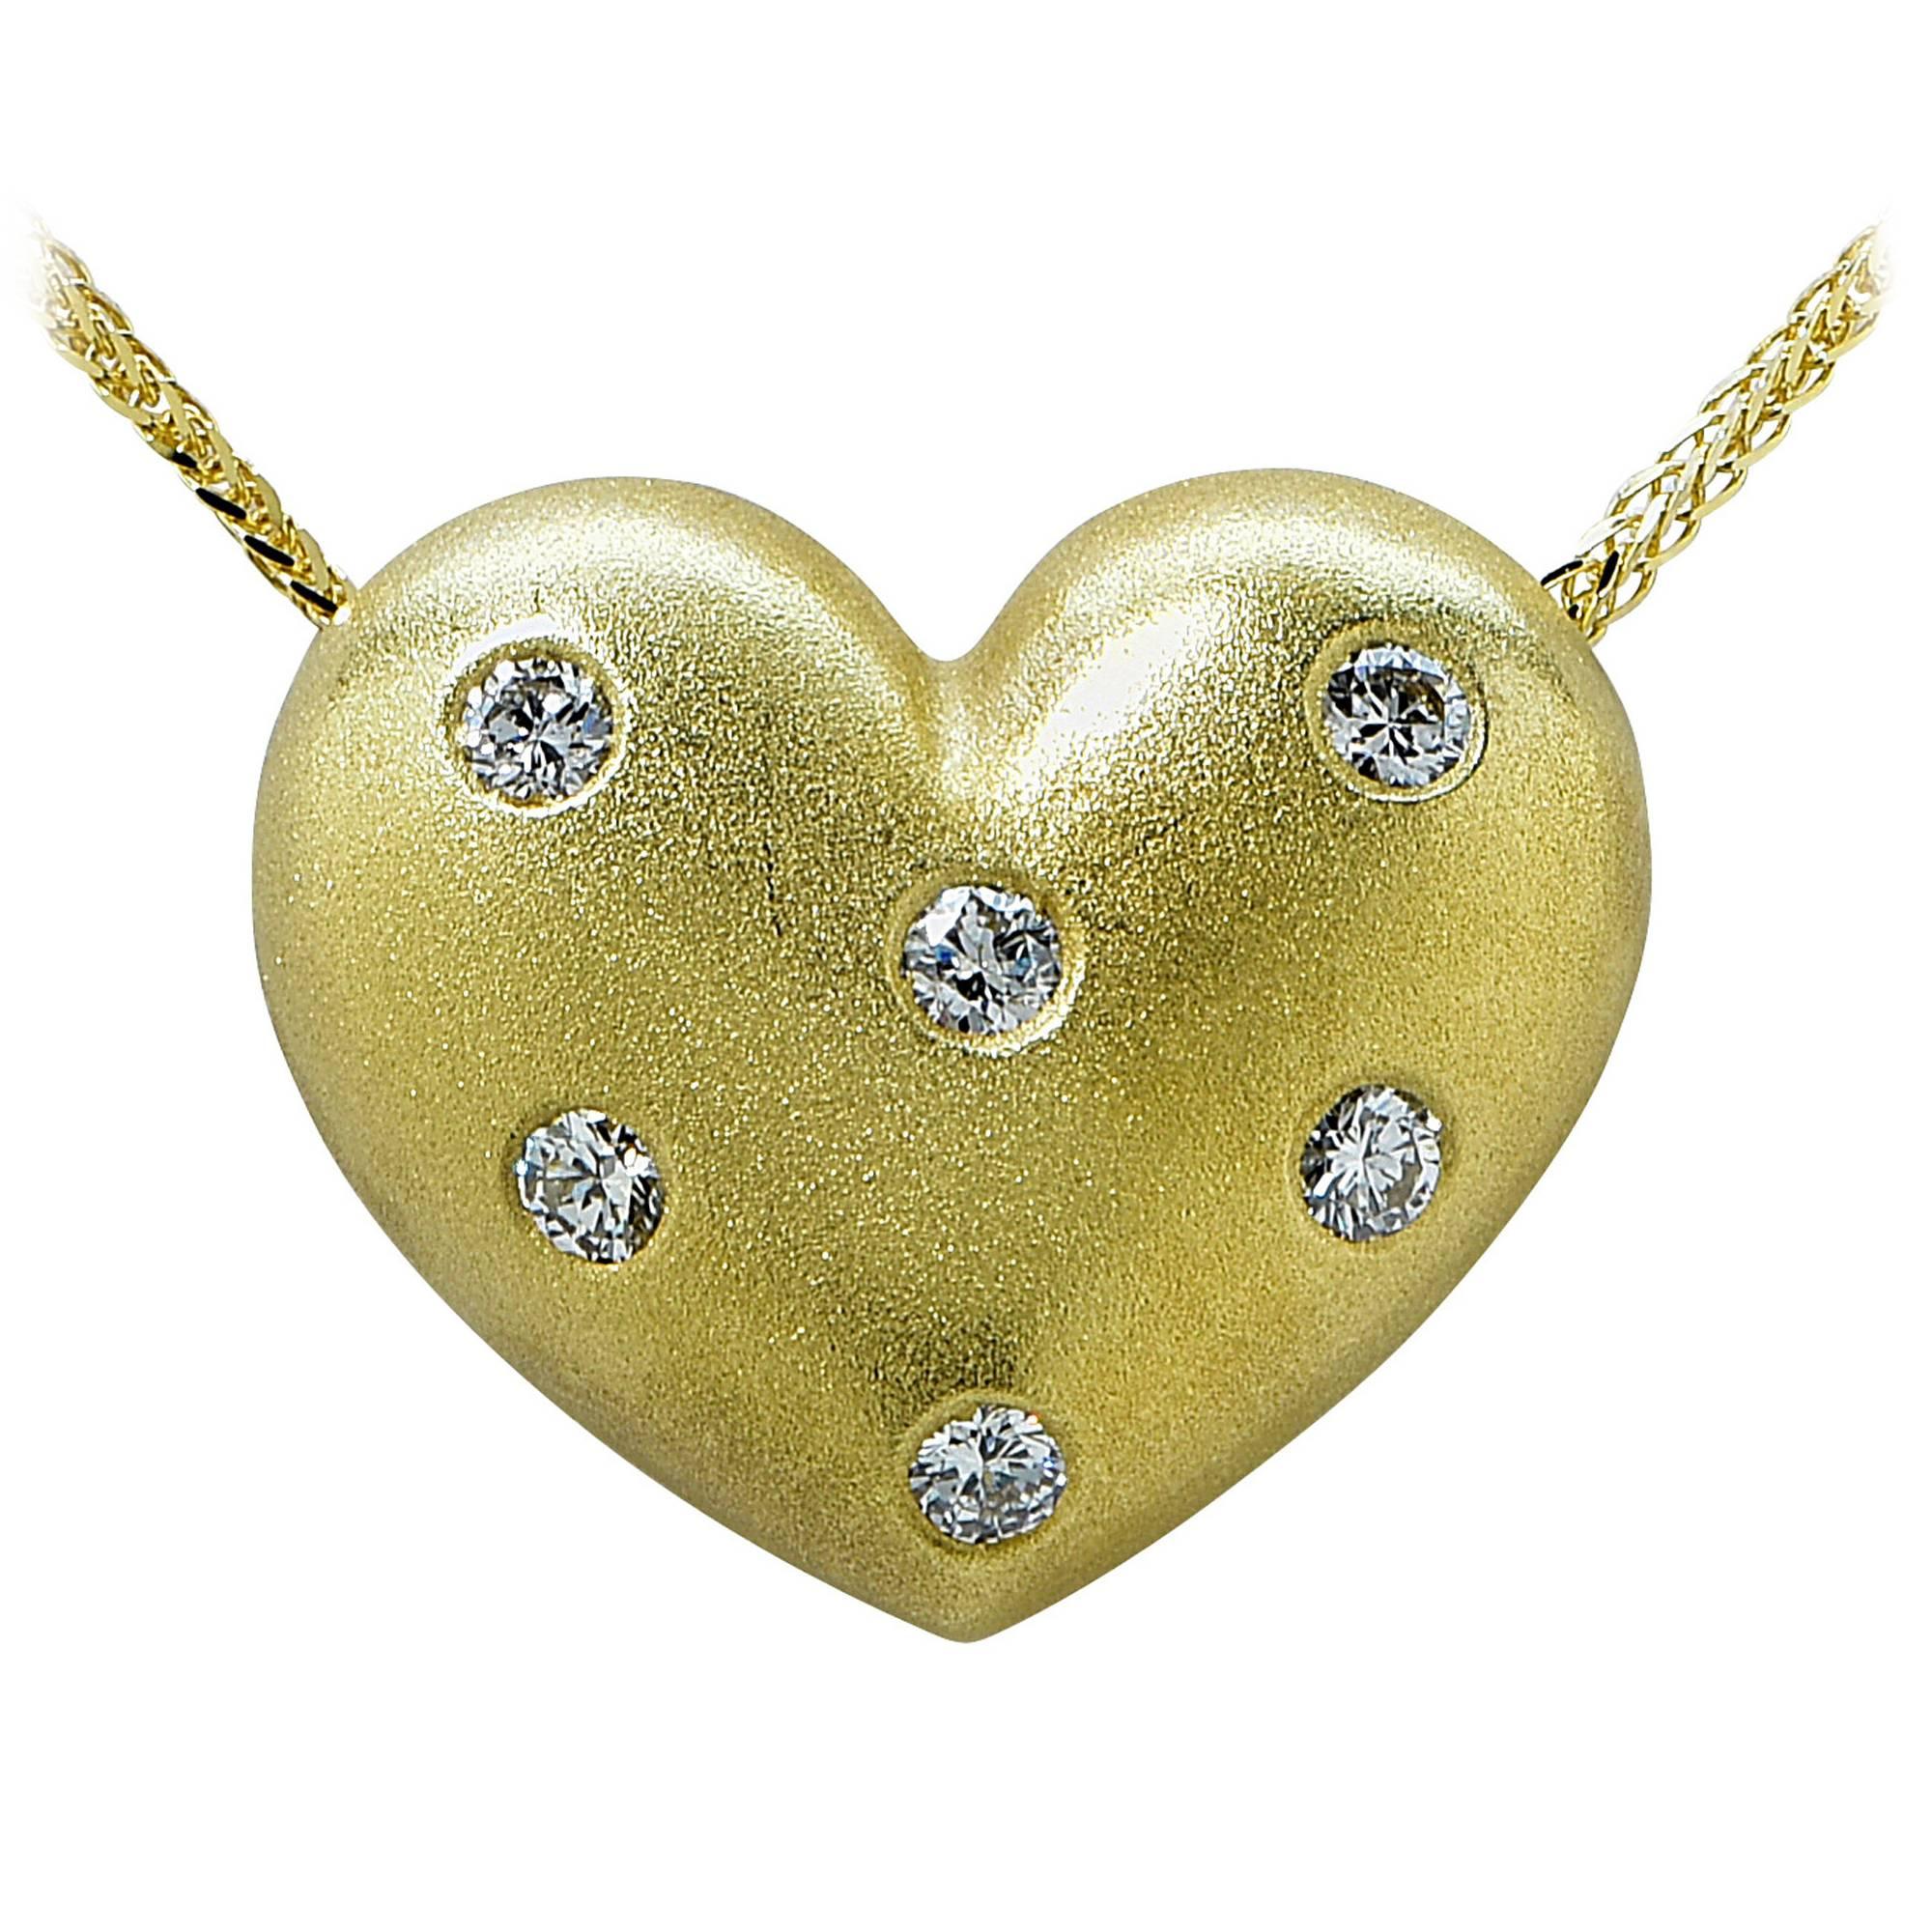 .50 Carat Diamond Necklace with Heart Pendent